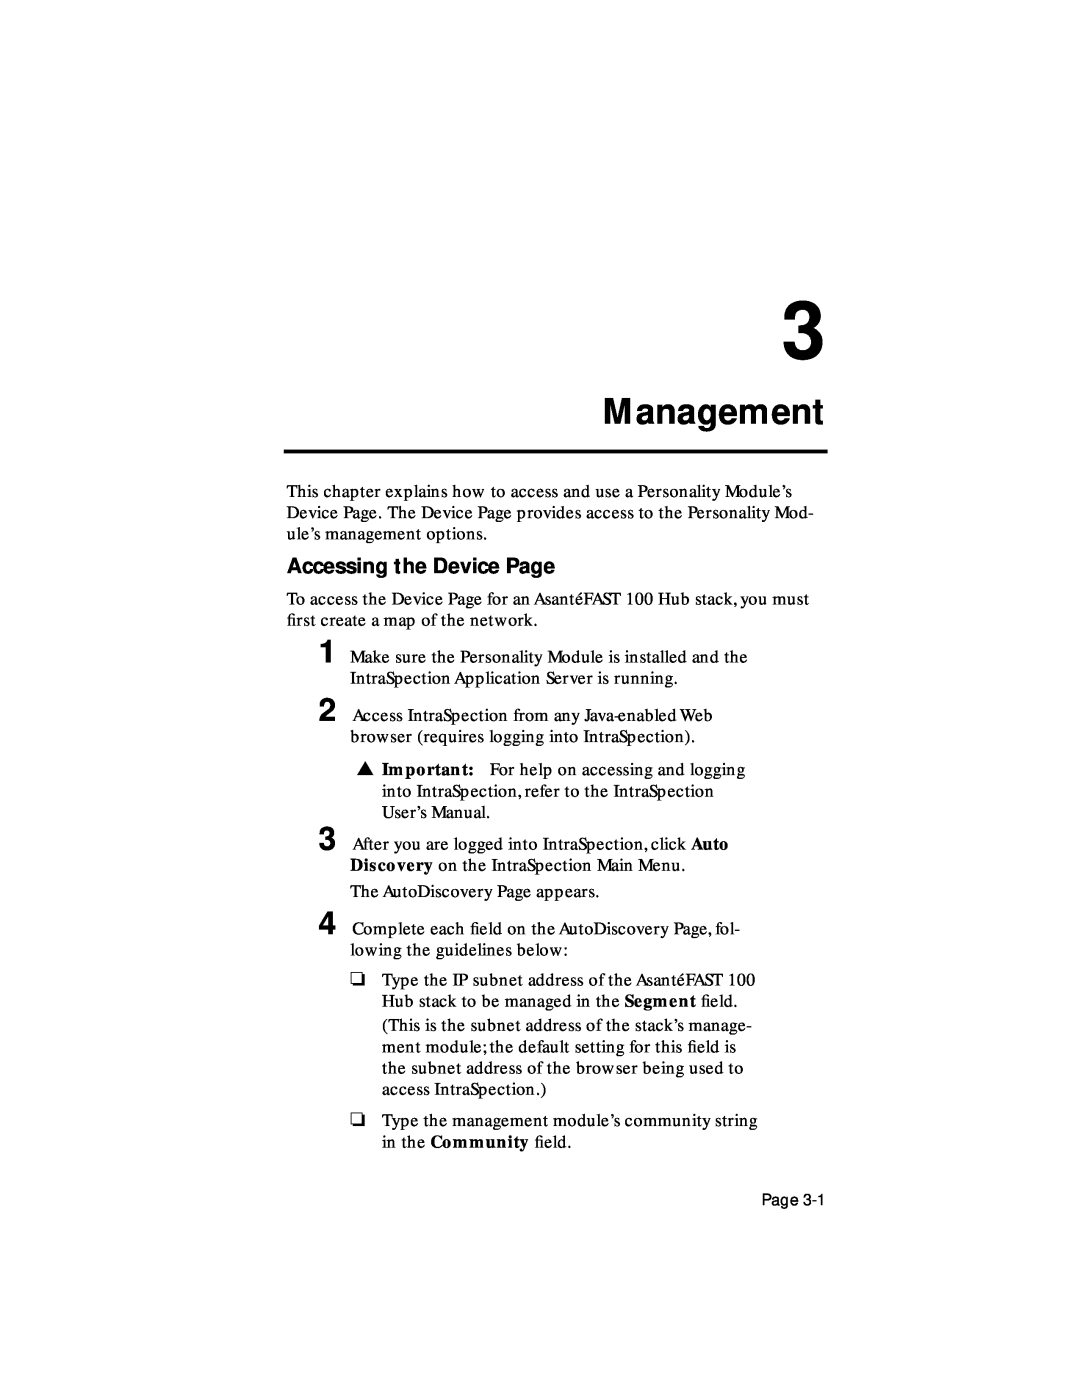 Asante Technologies 100TX user manual Management, Accessing the Device Page 